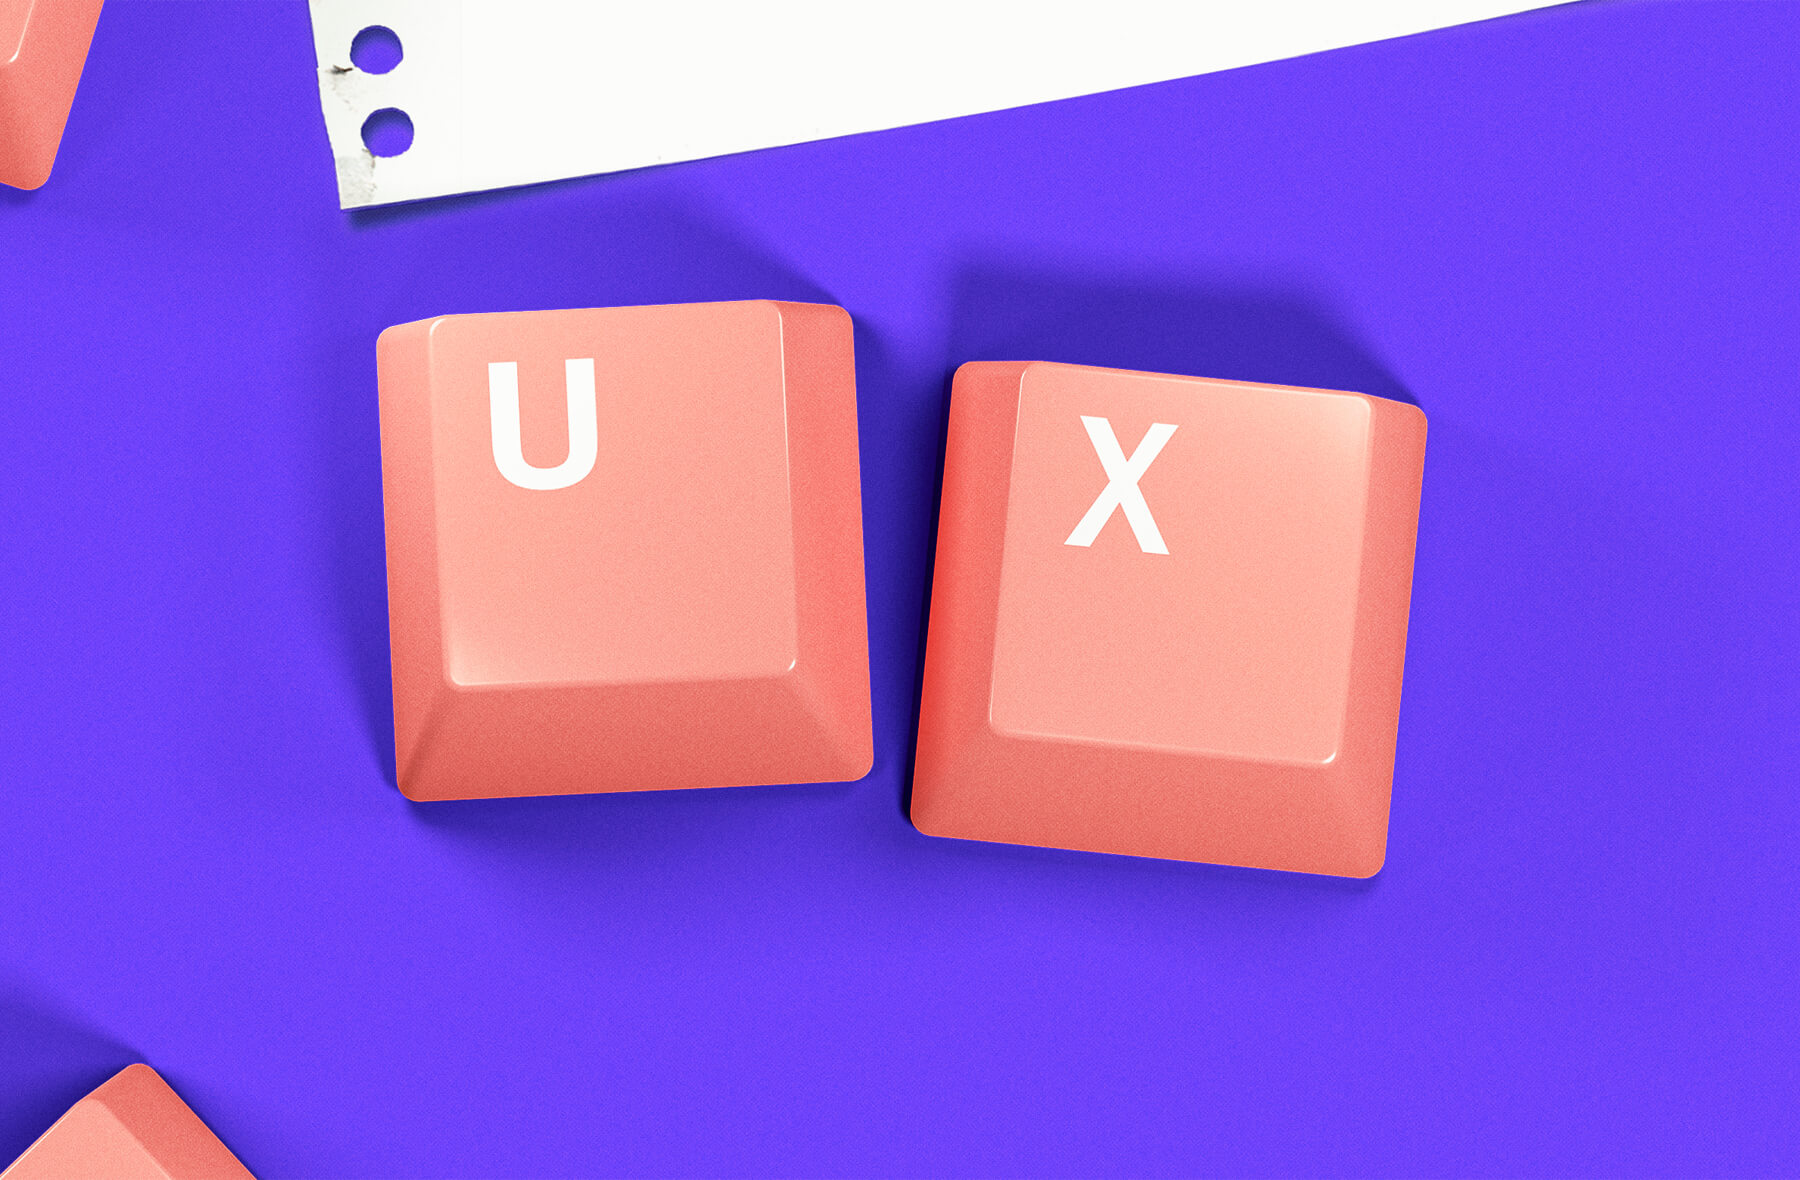 All about UX writing – How to create intuitive content that people want to read